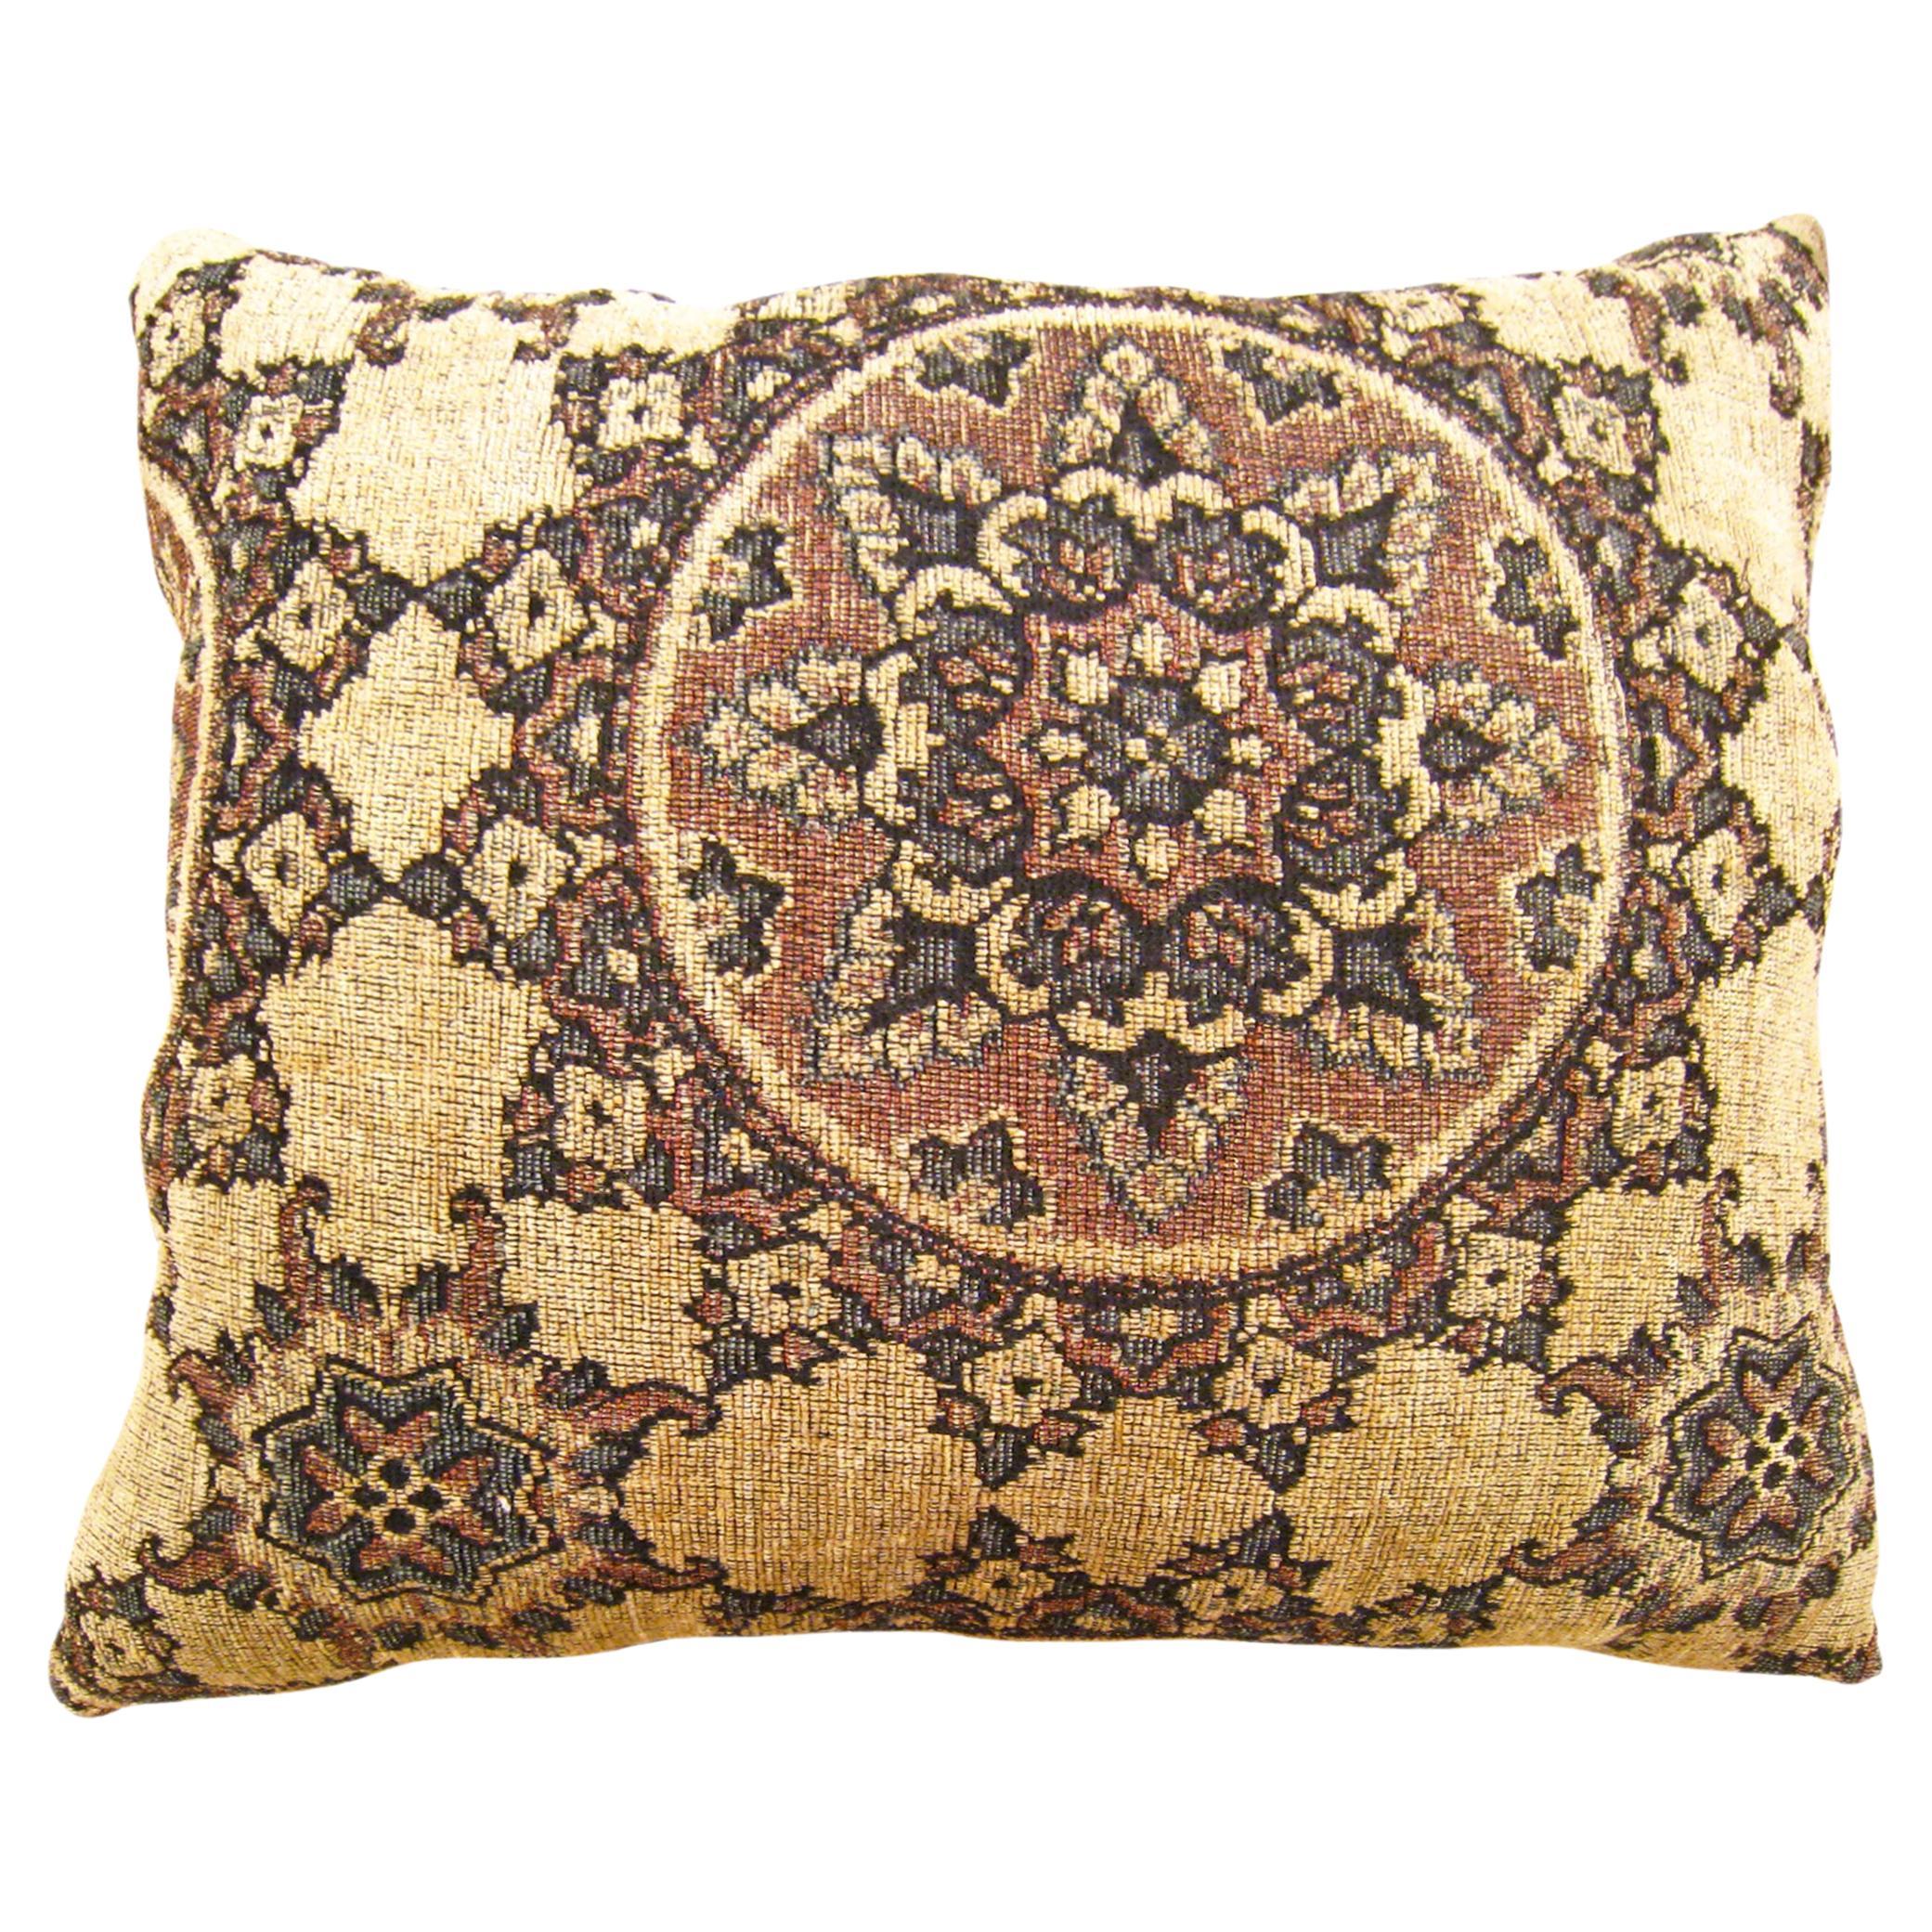 Decorative Vintage American Tapestry Pillow with Circles Design For Sale